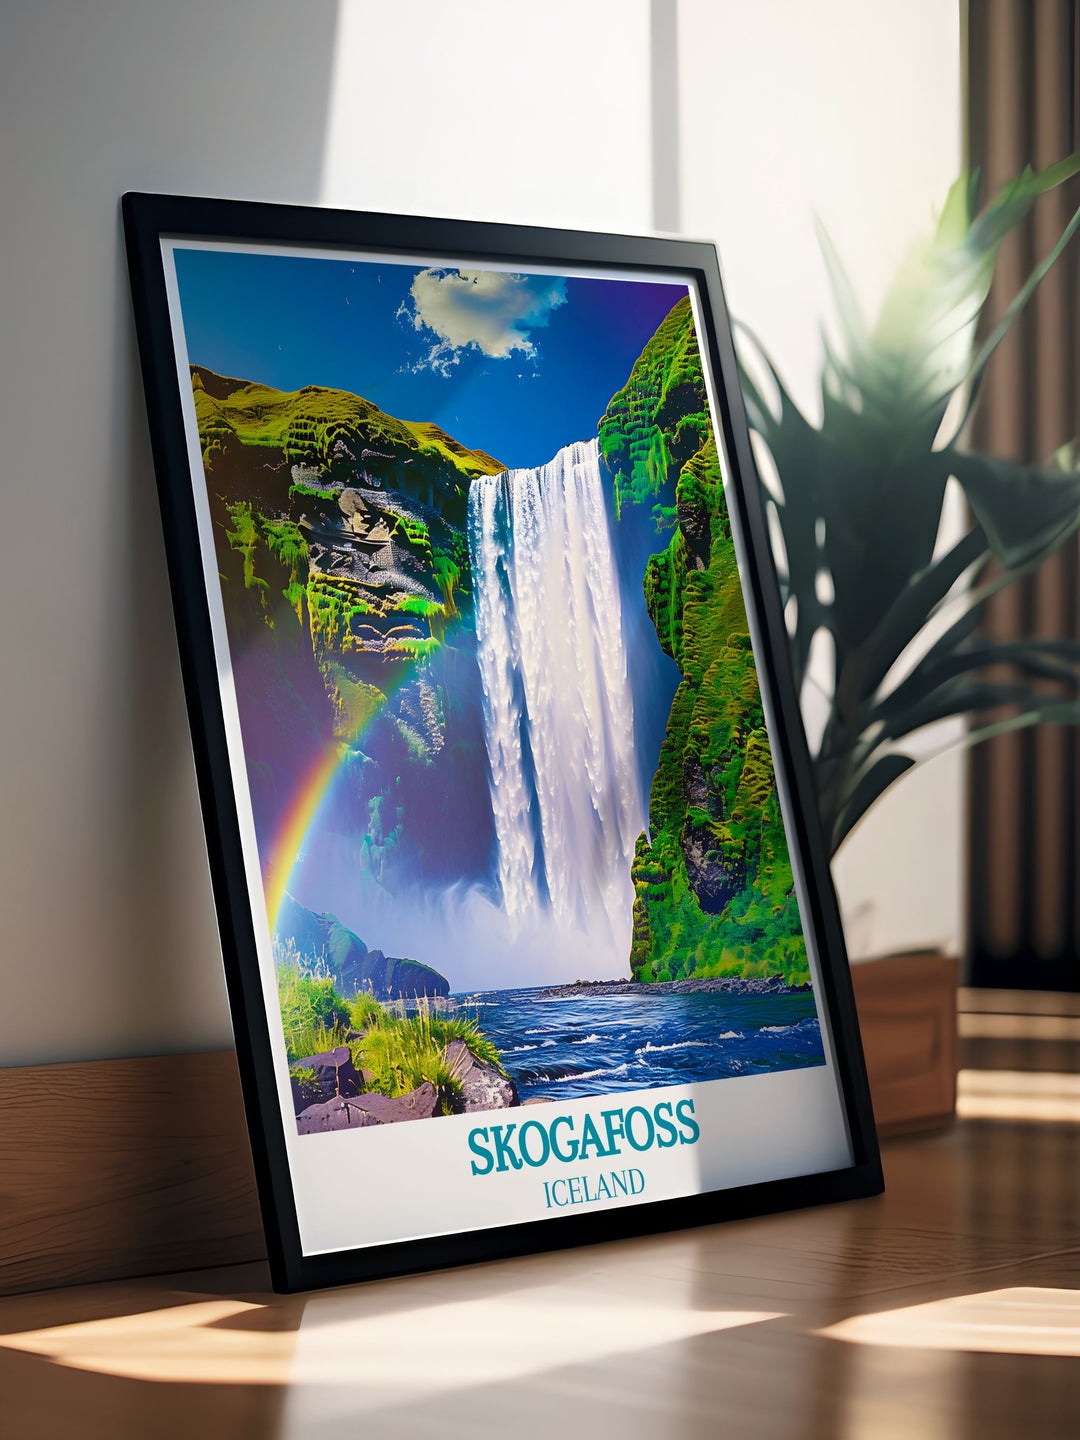 Showcase the majestic splendor of Skogafoss with this travel poster, perfect for adding a touch of Icelands natural beauty and wonder to your home decor.